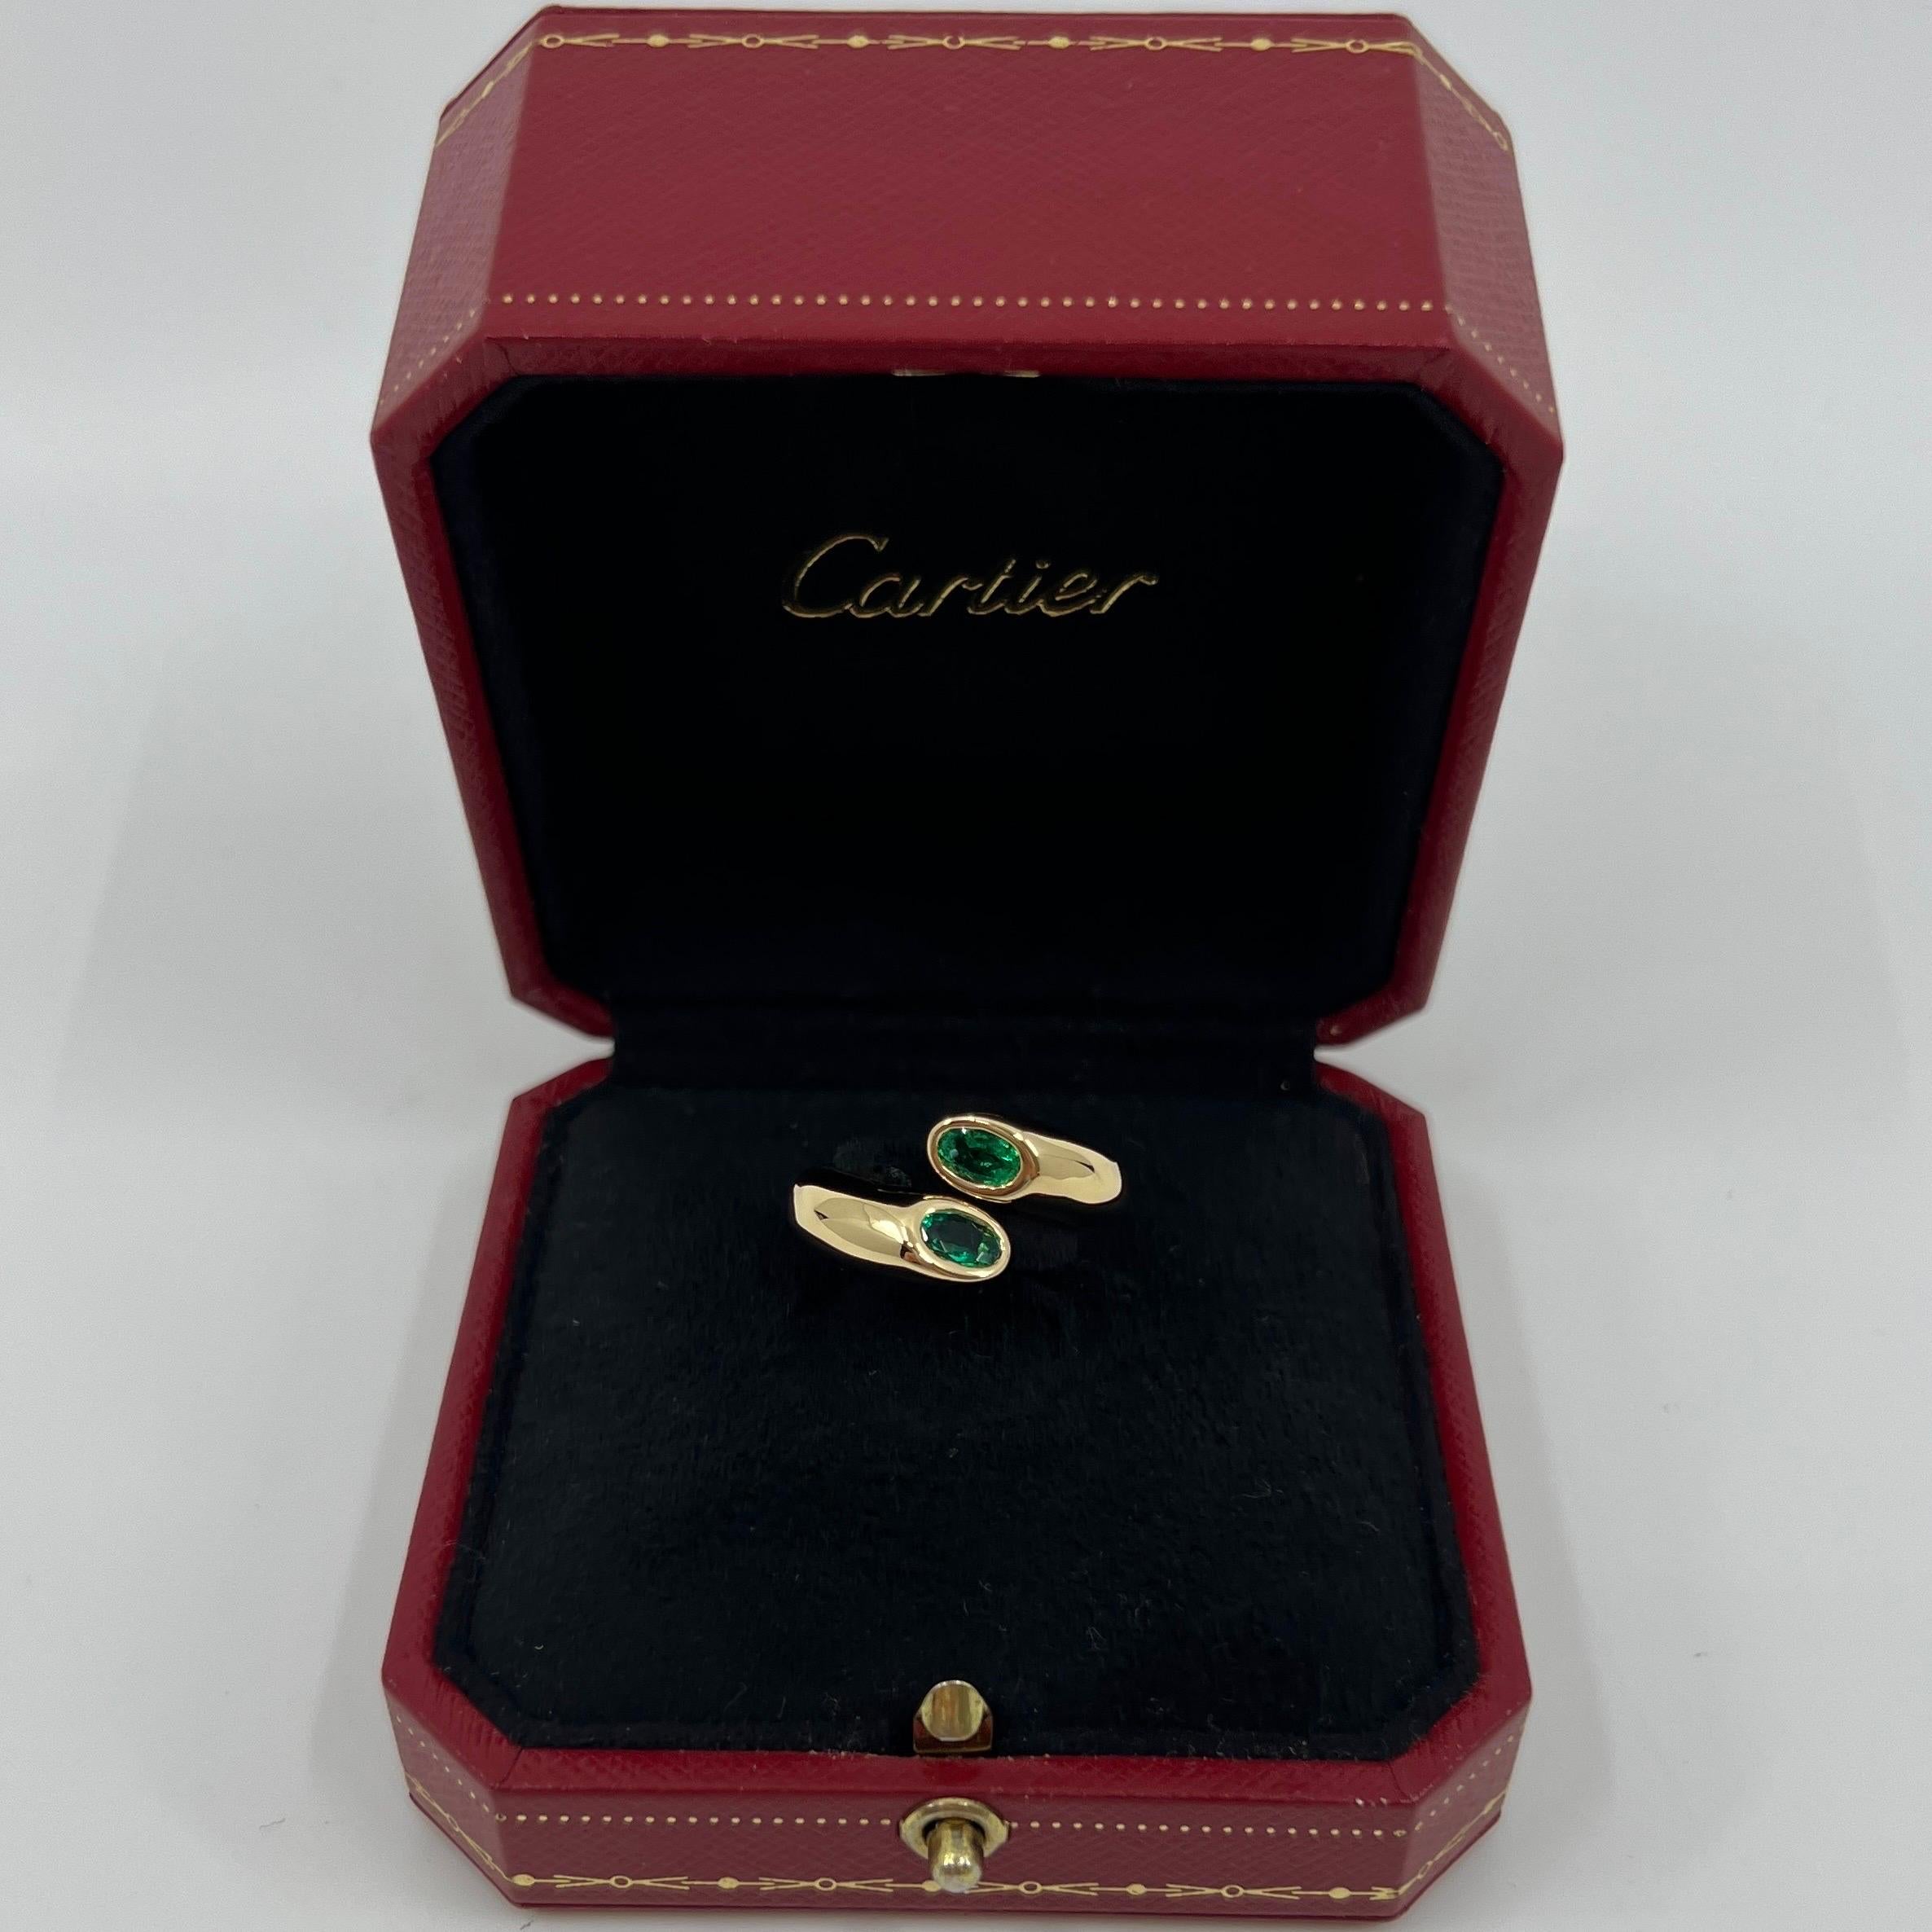 Vintage Cartier Vivid Green Emerald 18k Yellow Gold Bypass Ring.

Stunning yellow gold ring set with 2 fine vivid green oval cut emeralds. Fine jewellery houses like Cartier only use the finest of gemstones and these emeralds are no exception.

Two